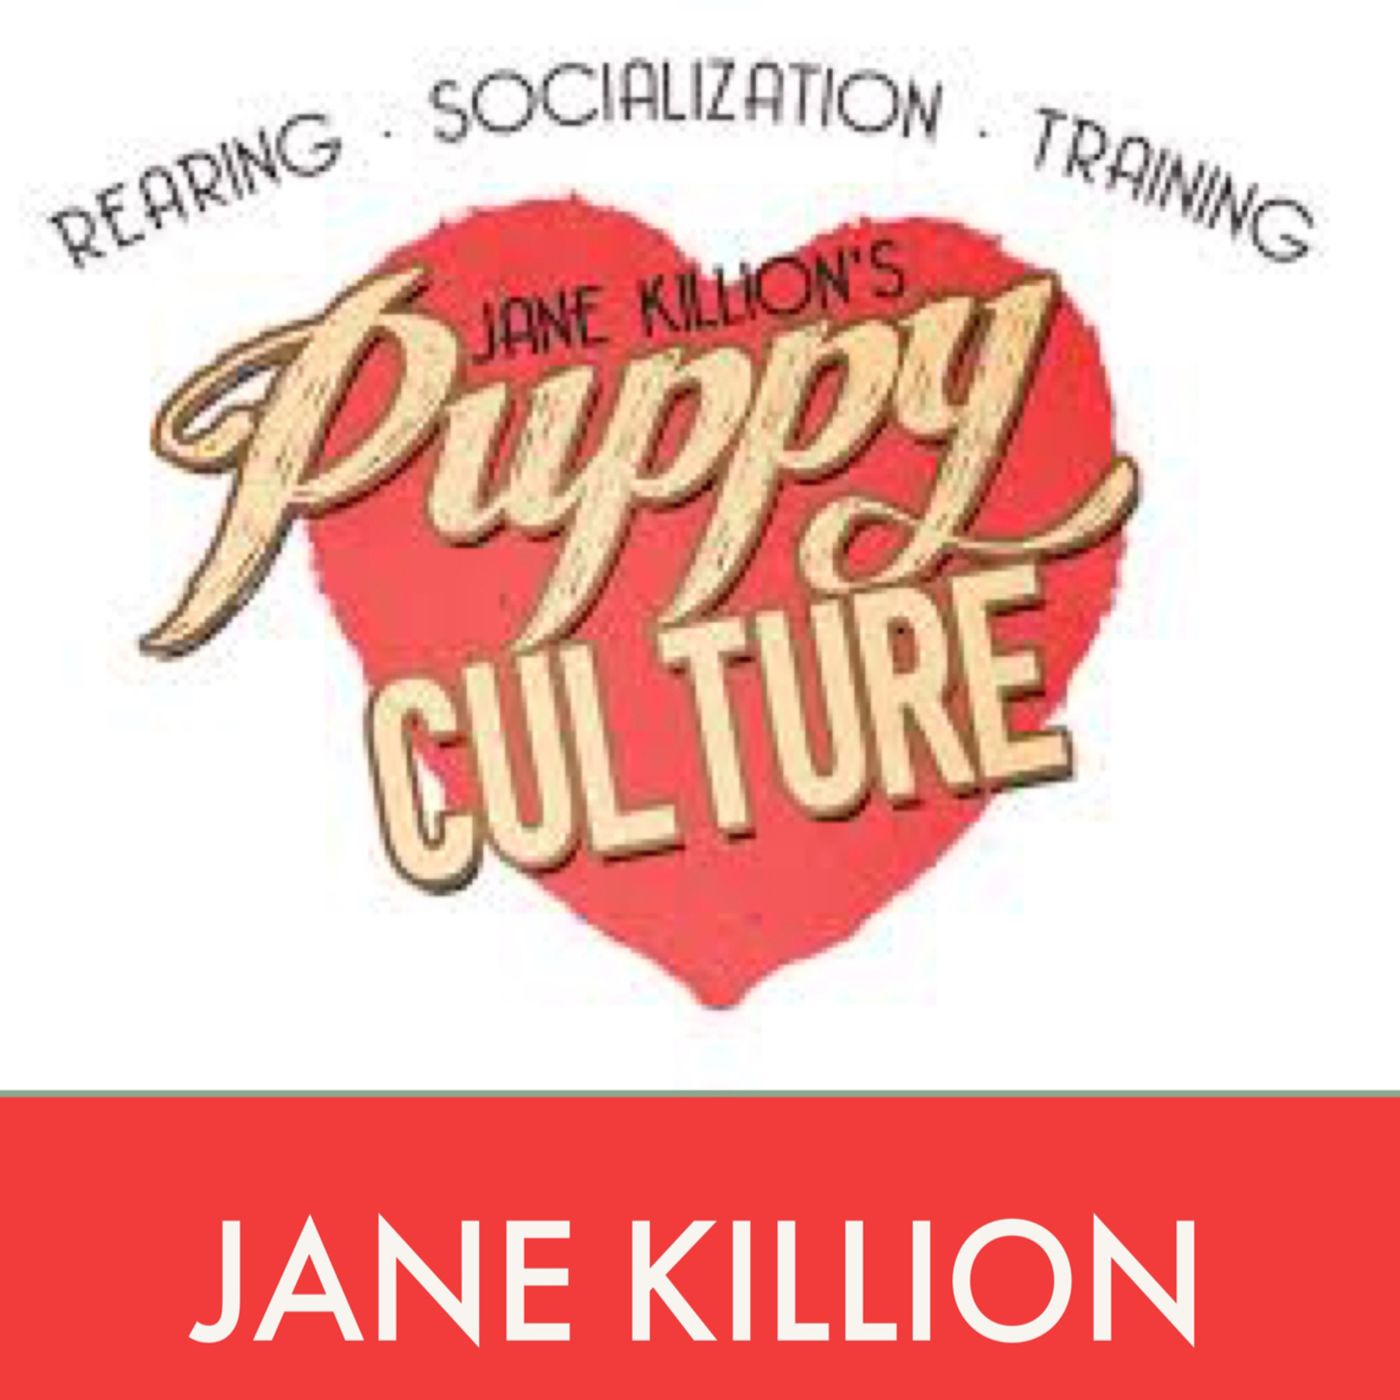 Jane Killion of Puppy Culture & author of When Pigs Fly